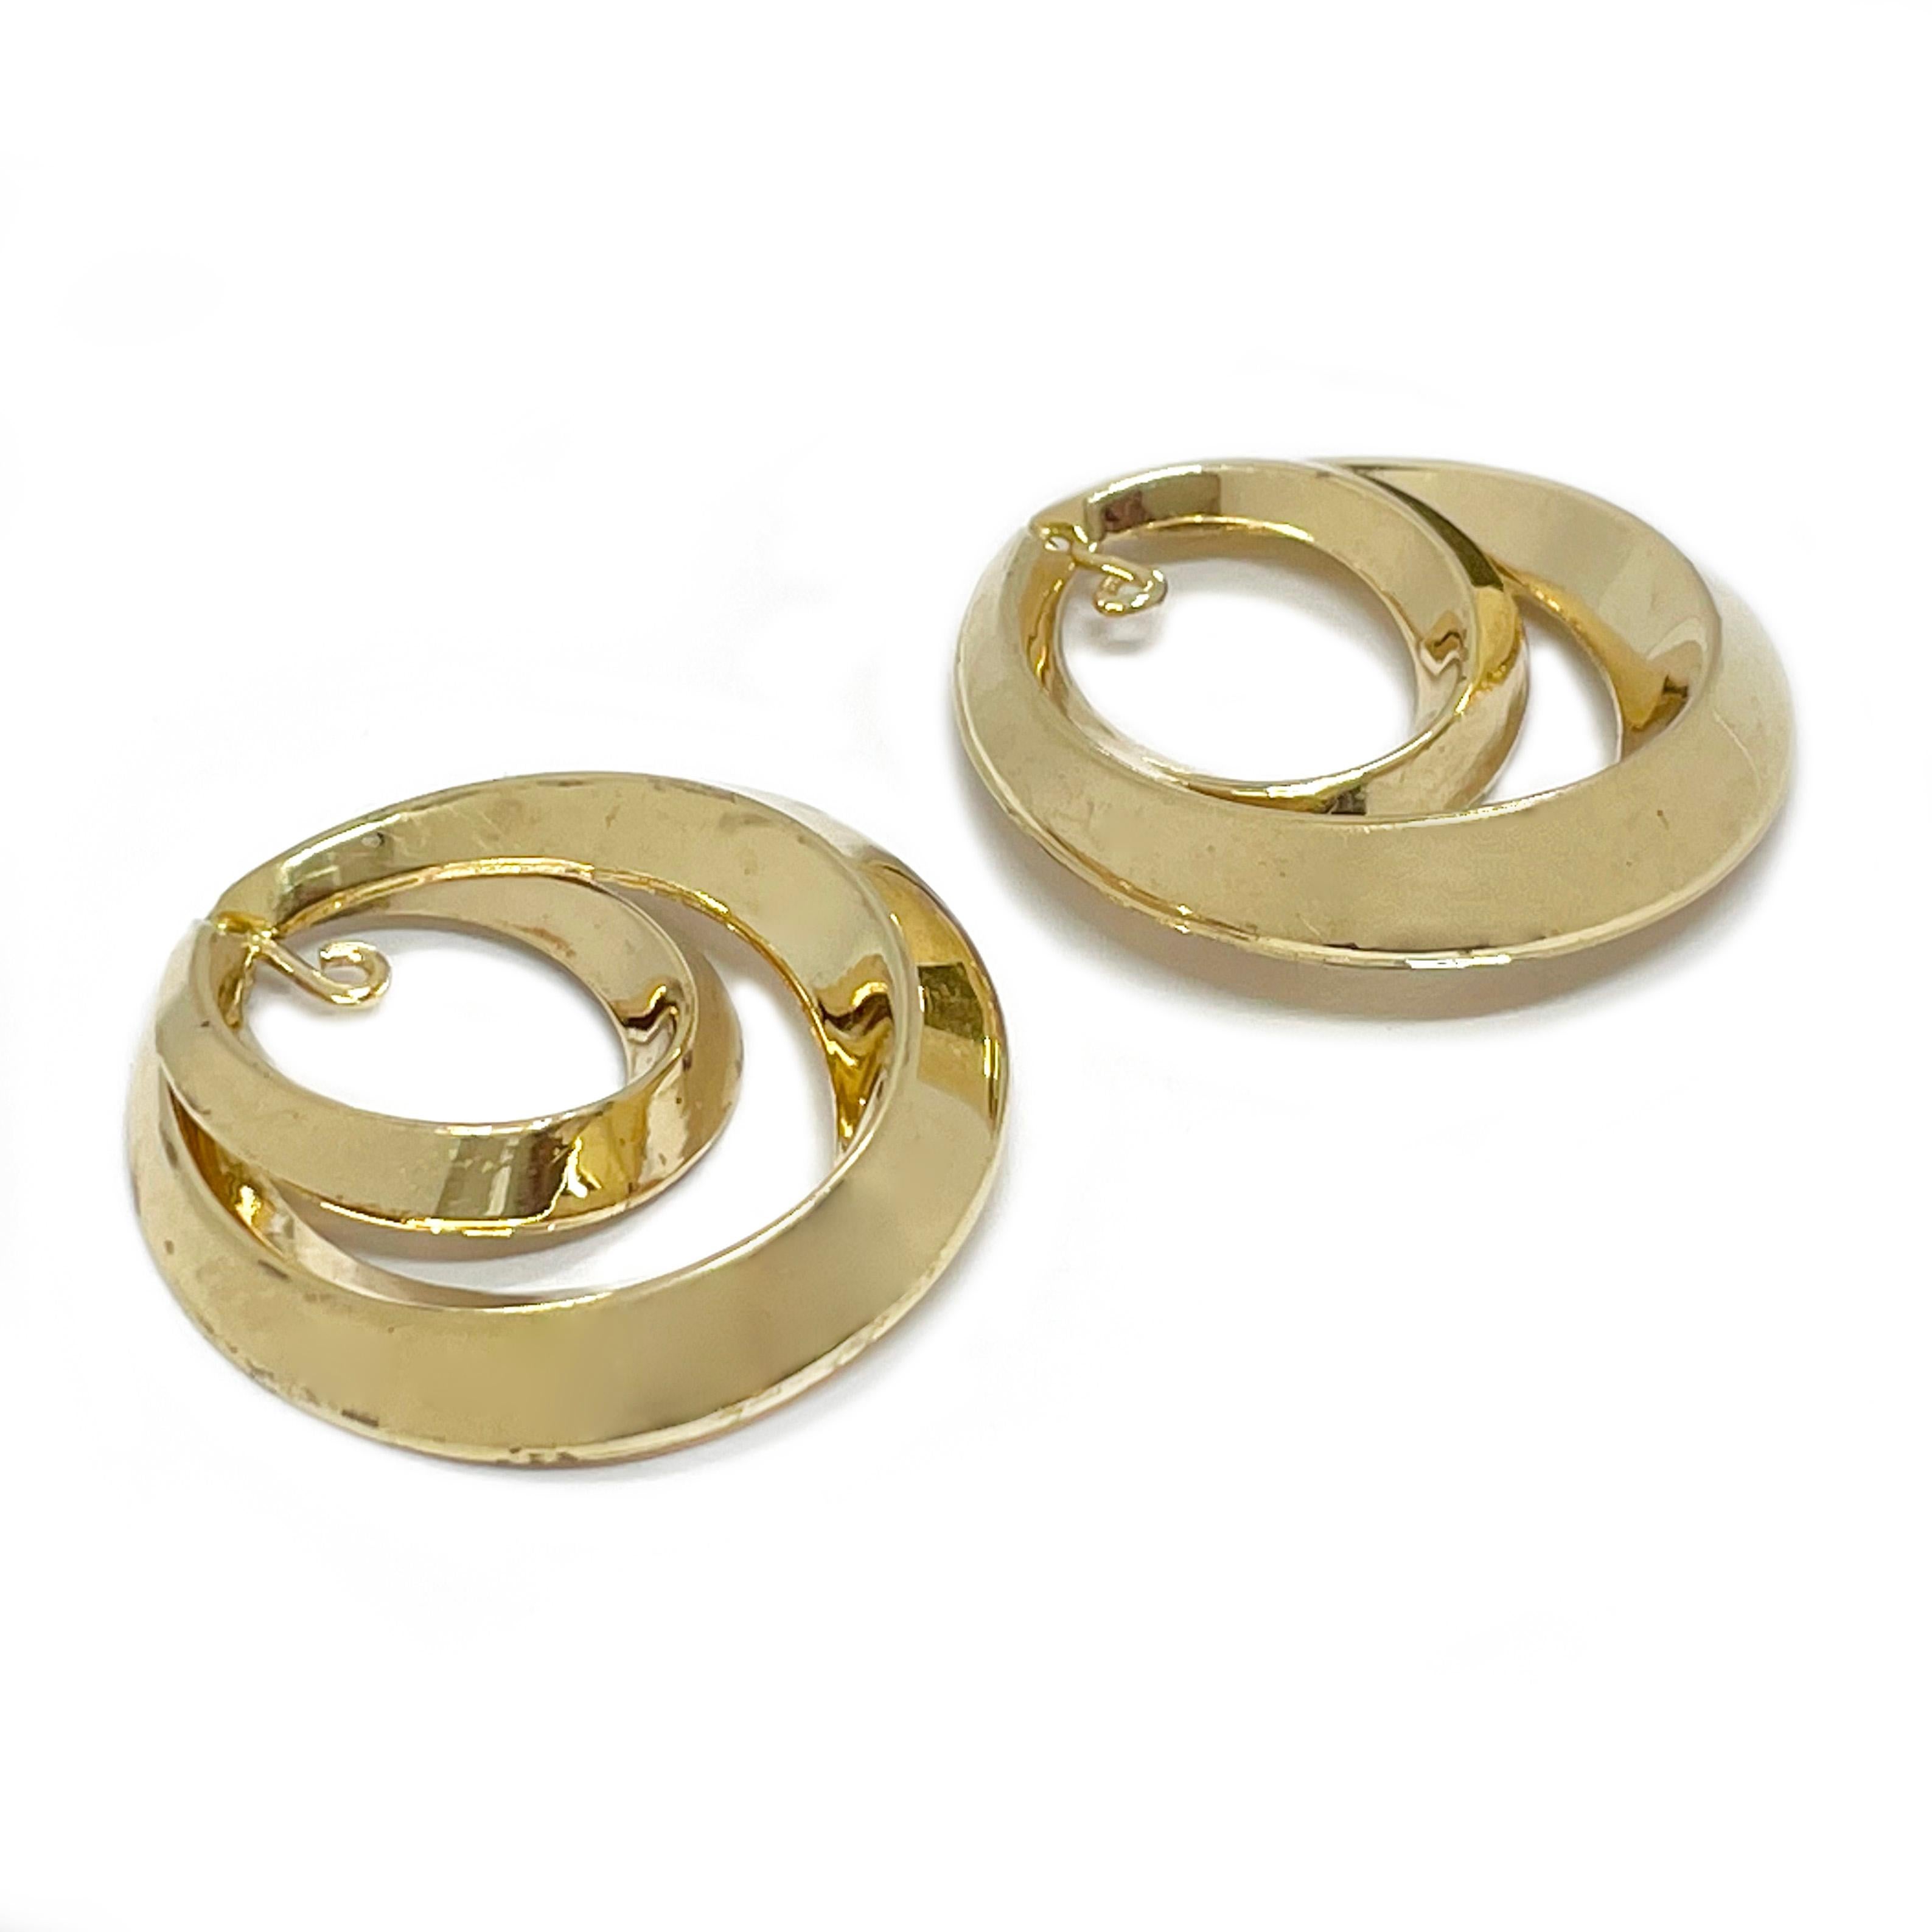 14 Karat Yellow Gold Double Beveled Hoop Earring Jackets. Add these earring jackets to any studs for an extra flair. The jackets feature smooth shiny double beveled hoops with a hanging wire opening coming down from the top of the earring jacket to